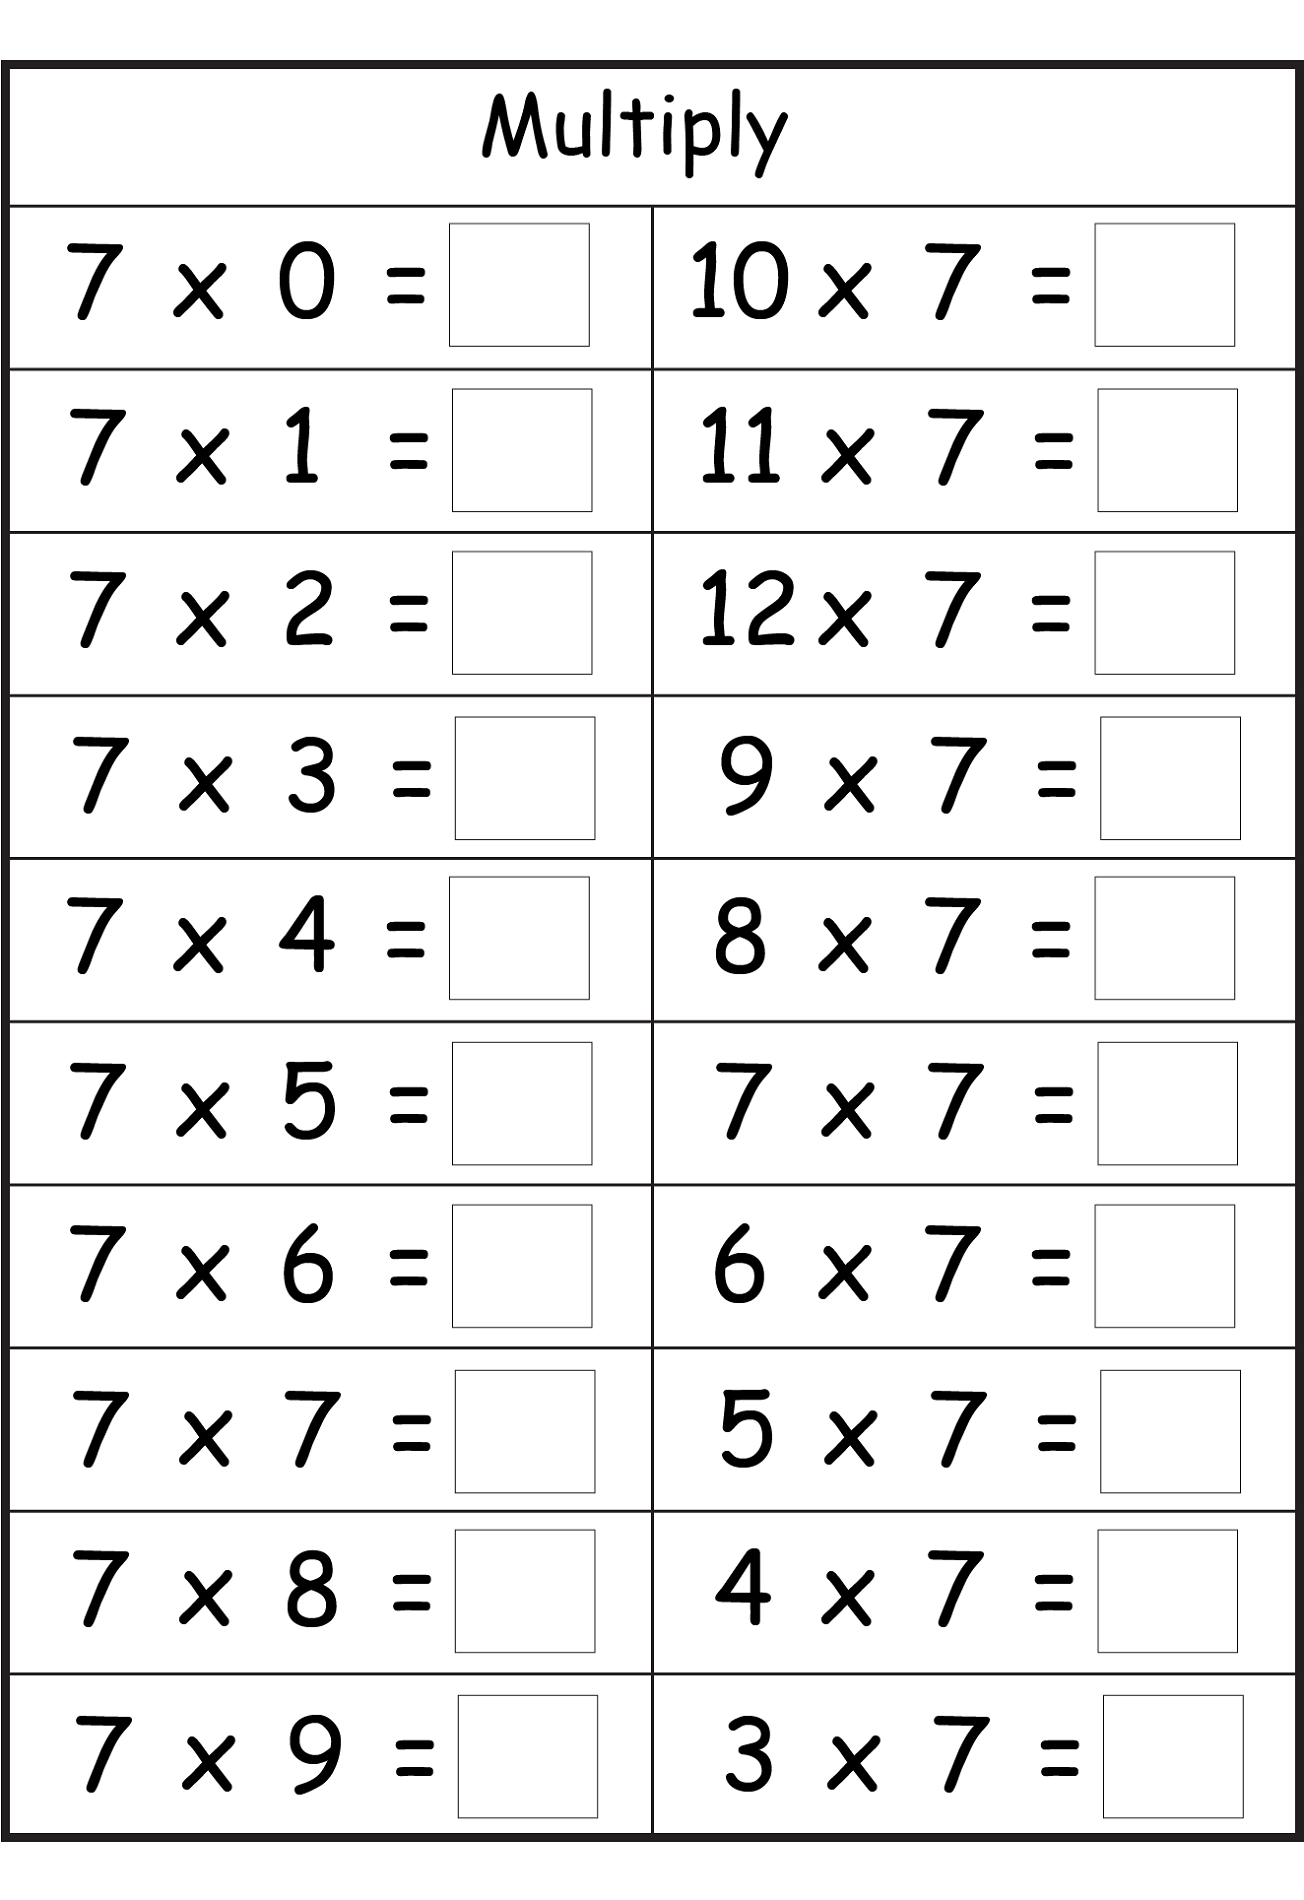 7 times table worksheet counting